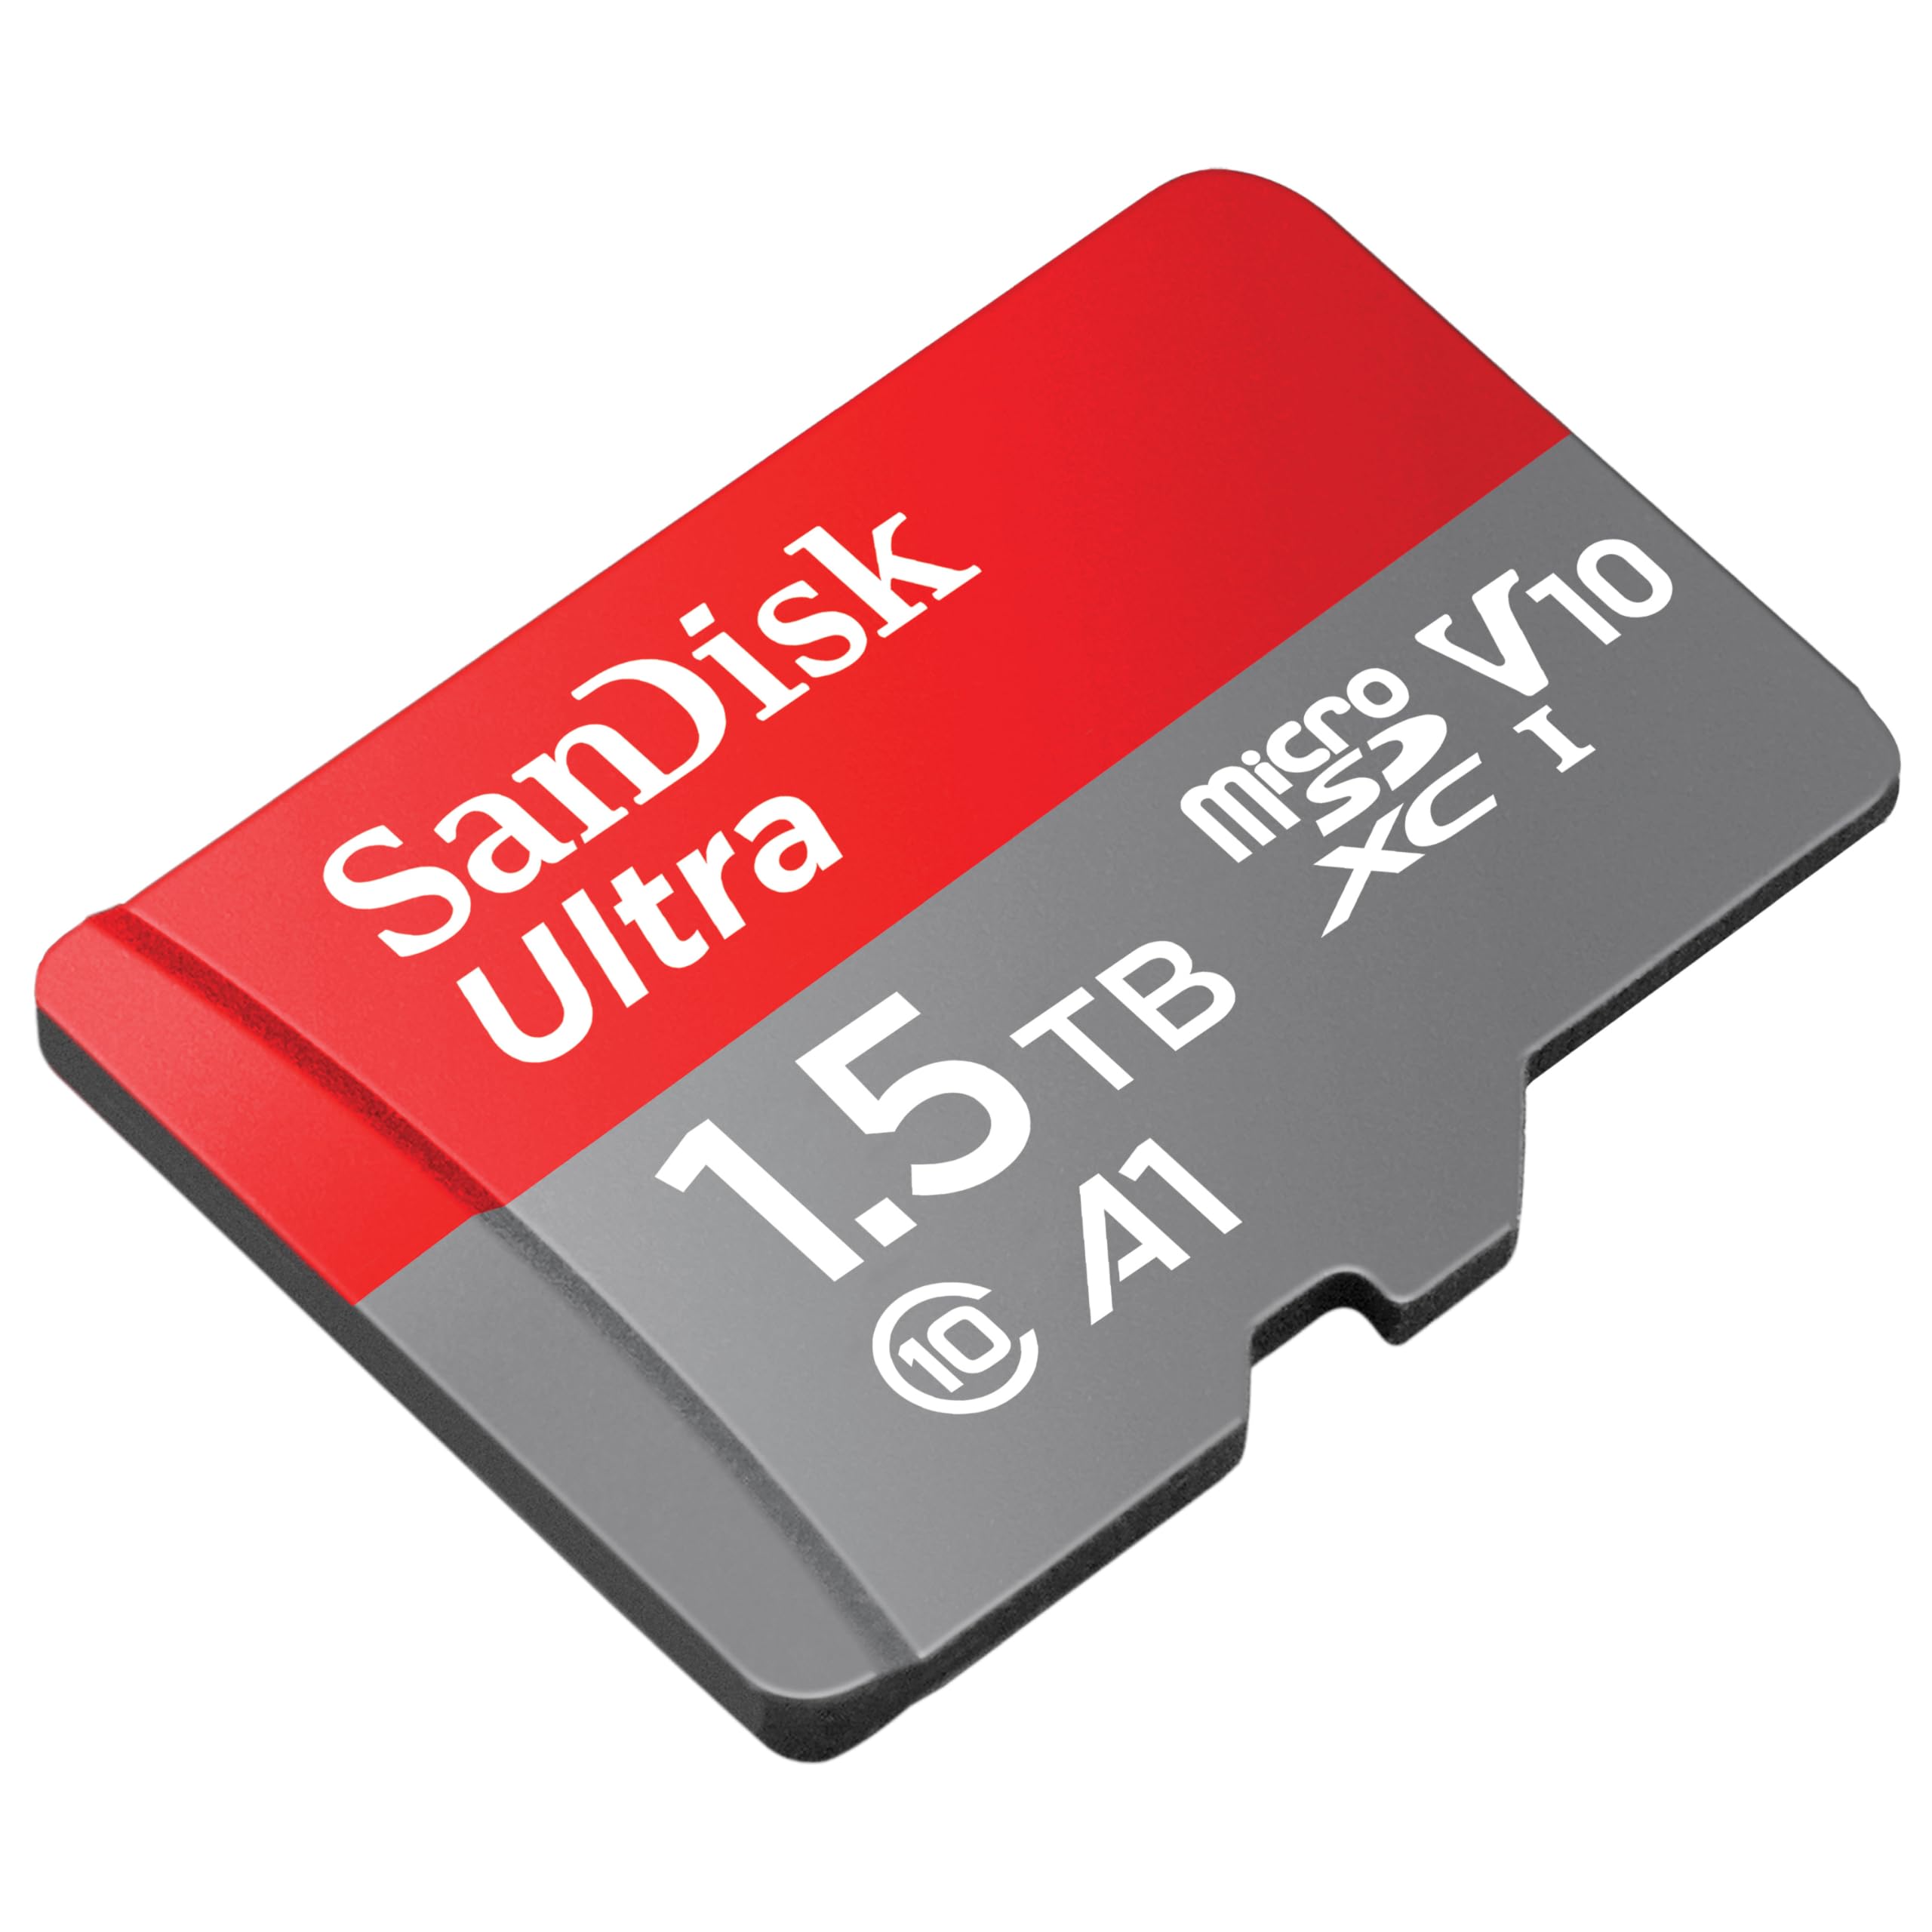 SanDisk 1.5TB Ultra microSDXC UHS-I Memory Card with Adapter - Up to 150MB/s, C10, U1, Full HD, A1, MicroSD Card - SDSQUAC-1T50-GN6MA